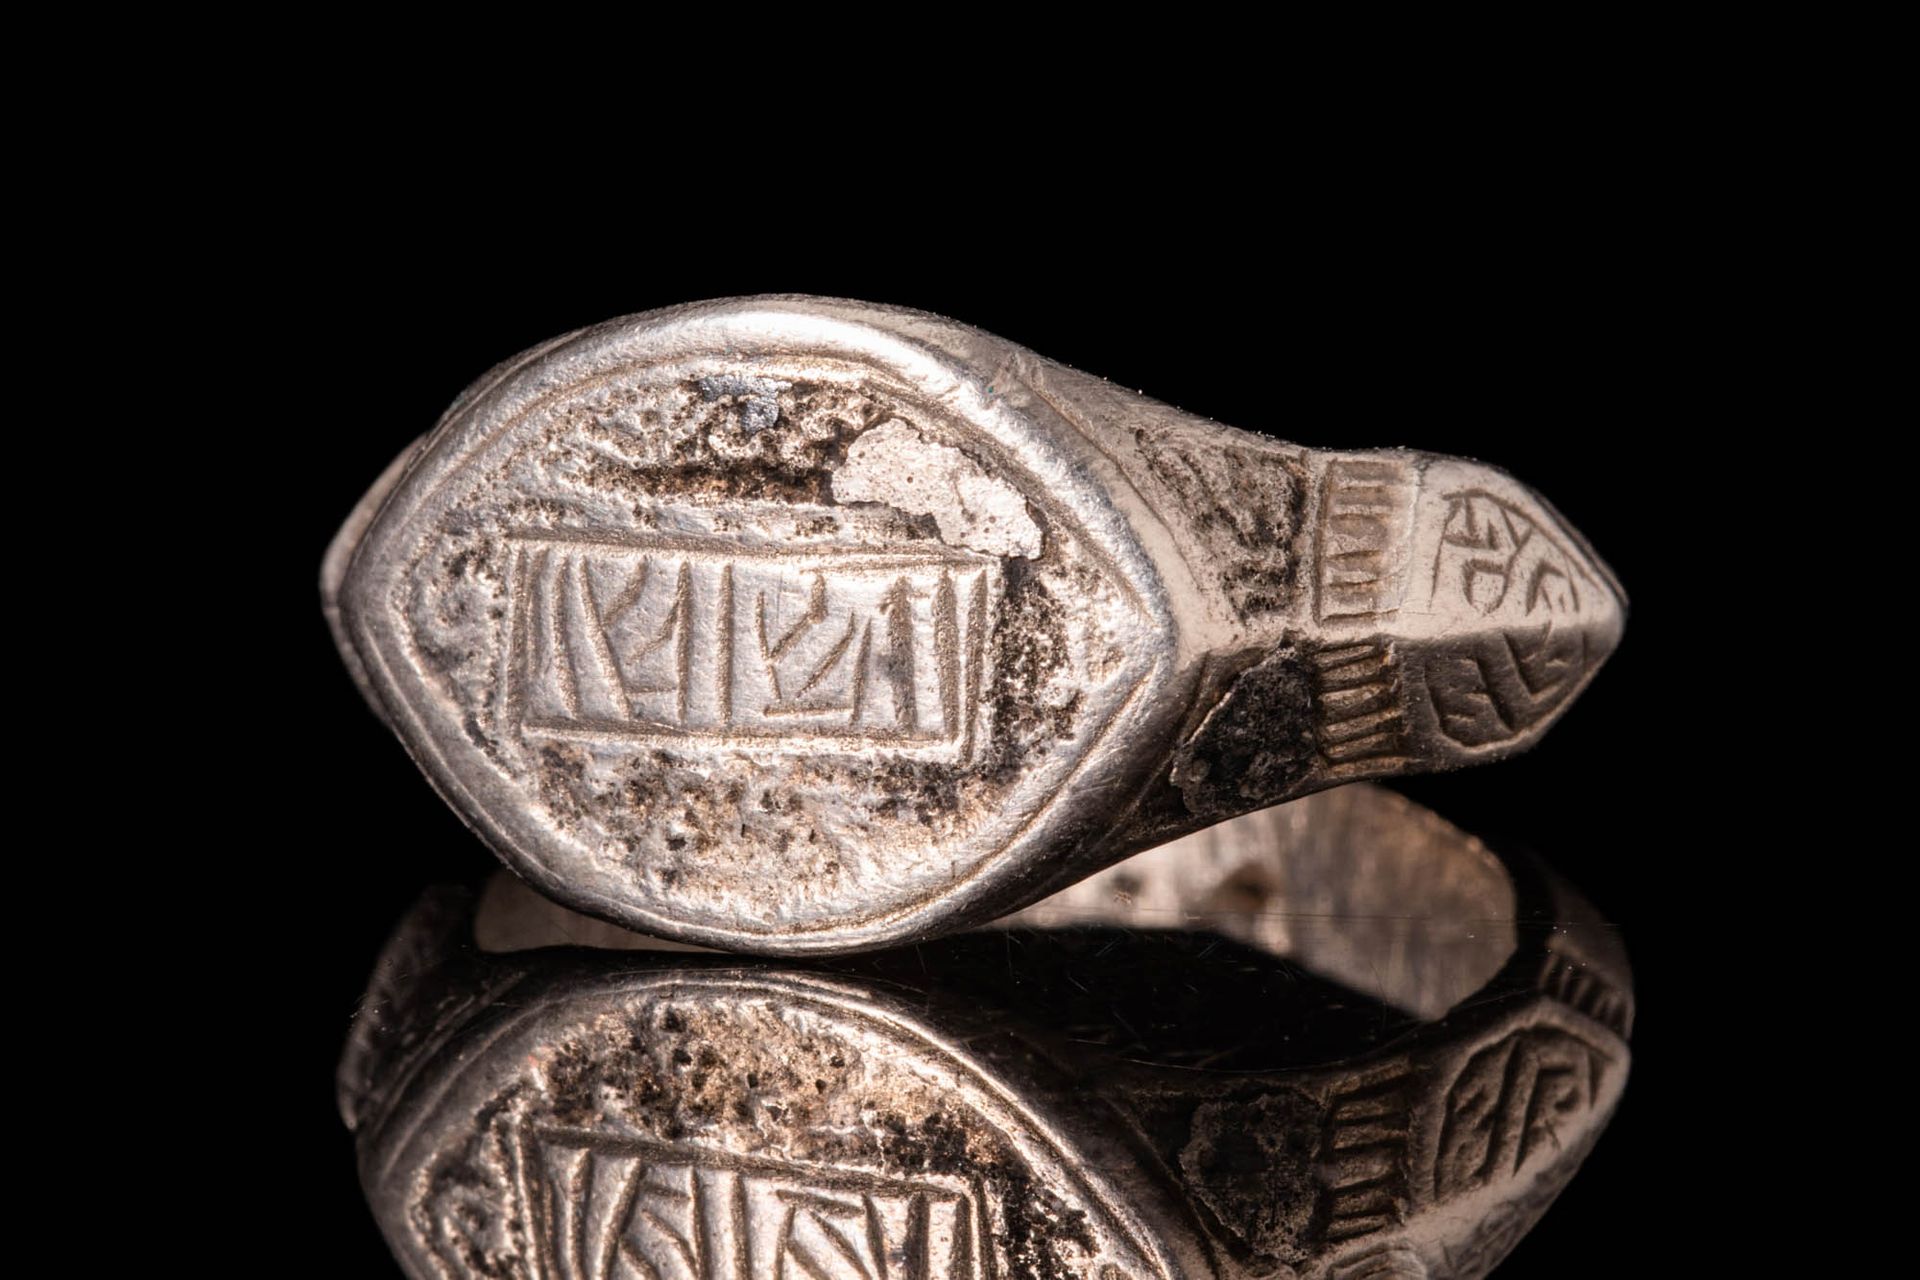 MEDIEVAL SELJUK SILVER FINGER RING WITH INSCRIPTION Ca. AD 900 - 1200.
Ein mitte&hellip;